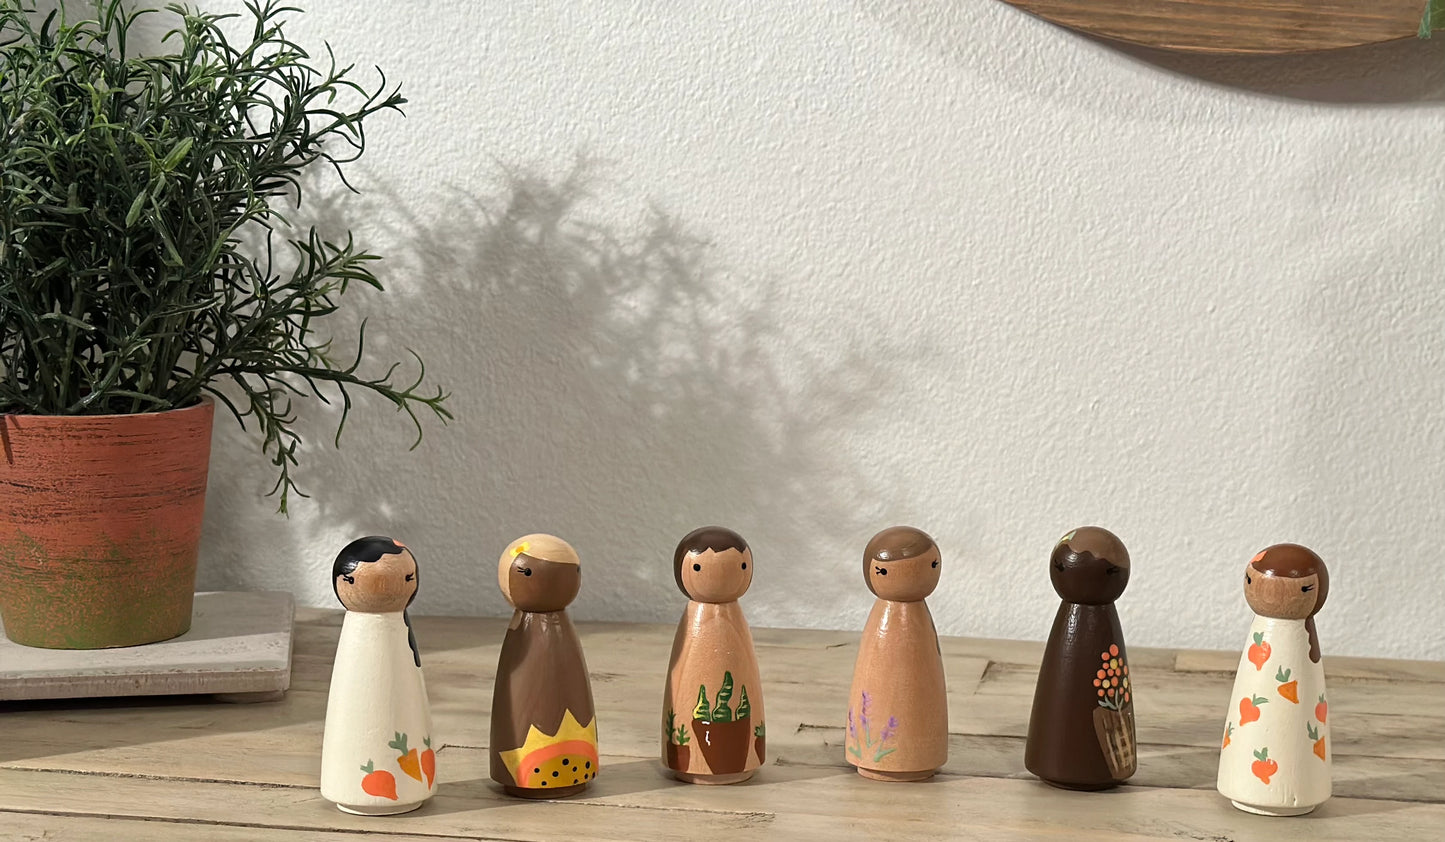 Hand Painted Wooden Peg Dolls